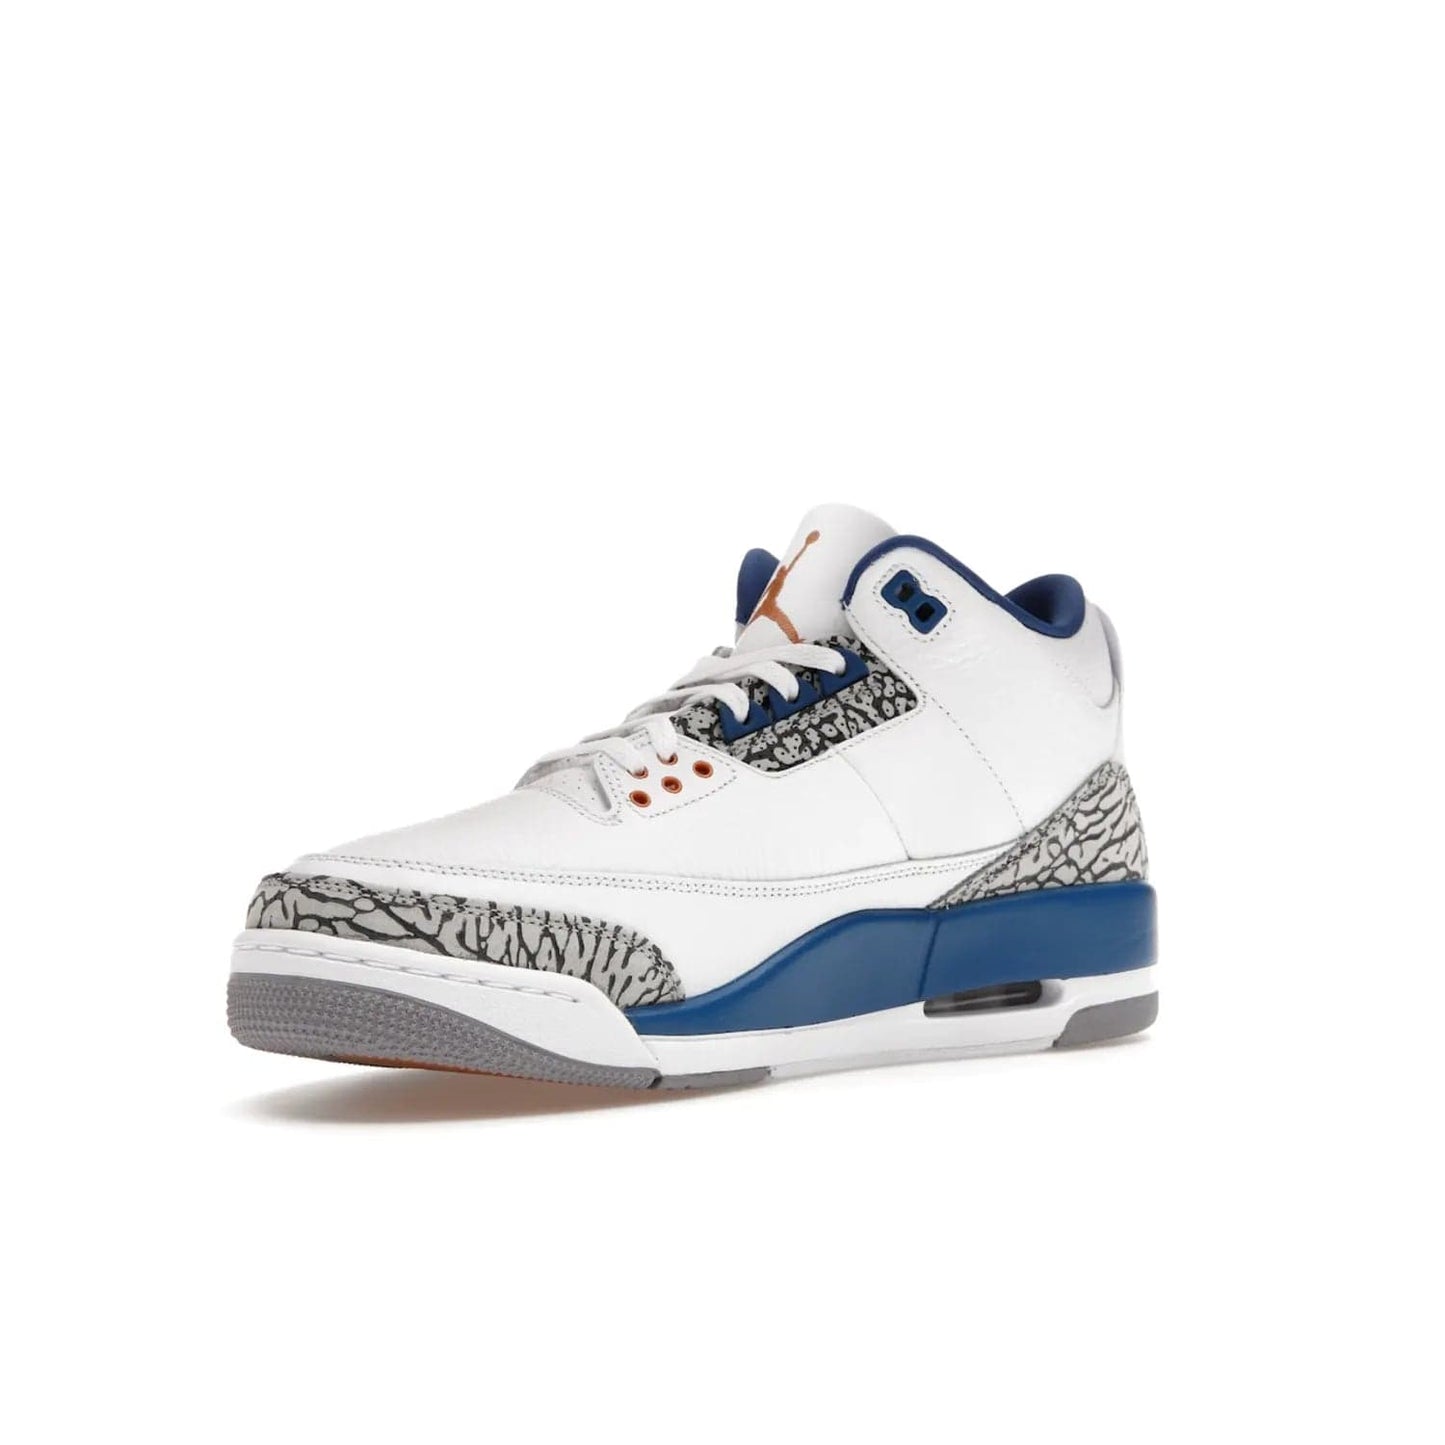 Jordan 3 Retro Wizards - Image 15 - Only at www.BallersClubKickz.com - ##
Special tribute sneaker from Jordan Brand to Michael Jordan's time with the Washington Wizards. Iconic white upper, orange Jumpman logo, blue accents, metallic copper details, and cement grey outsole. Buy the Air Jordan 3 Retro Wizards April 29, 2023.